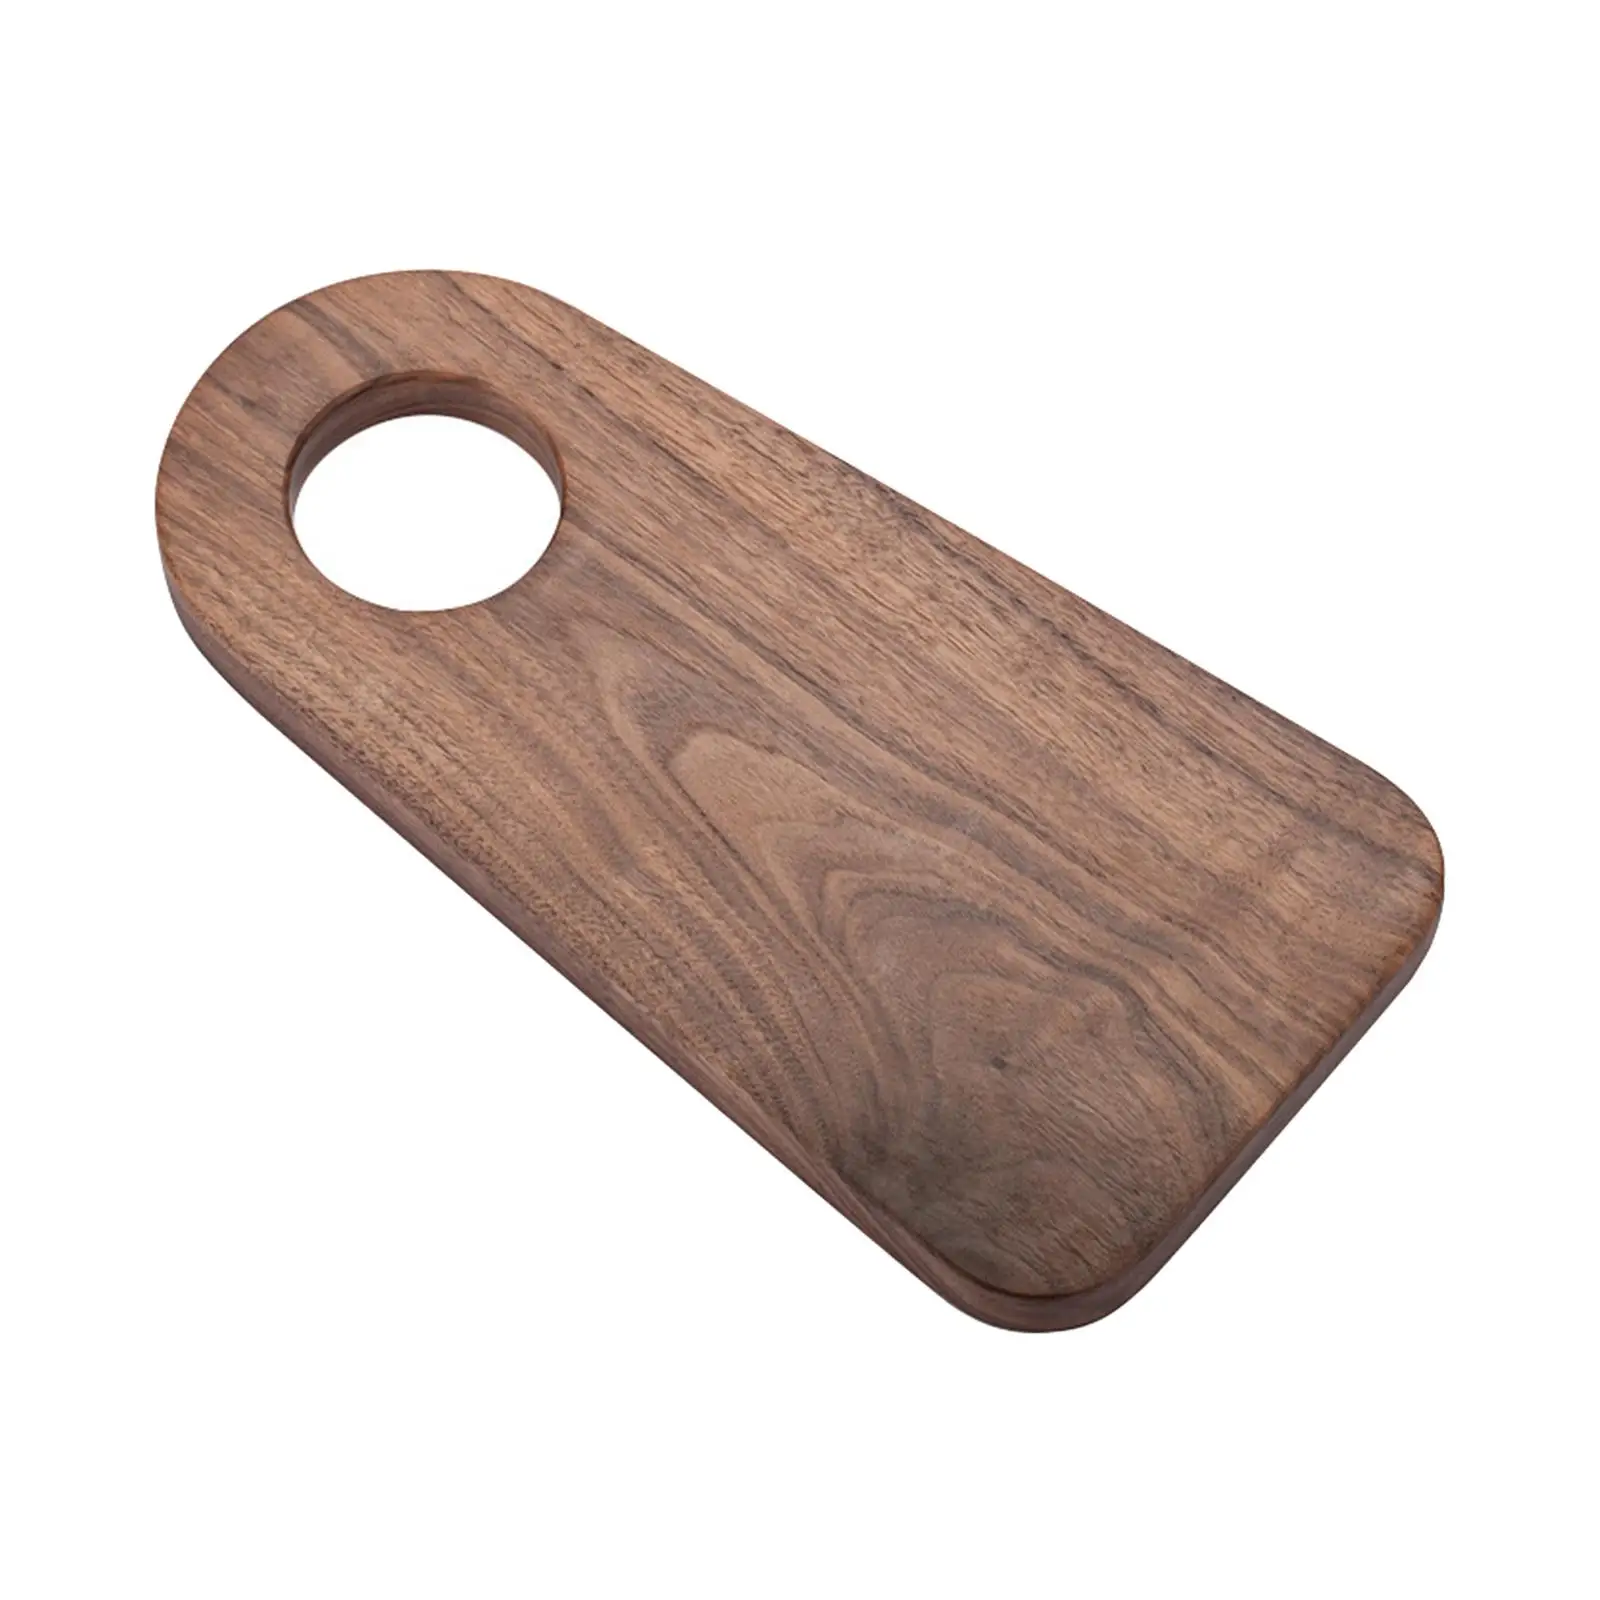 Wooden Chopping Board Kitchen Tools Bread Tray with Handle Serving Board Utensils Pizza Board Cutting Board for Steak Meat